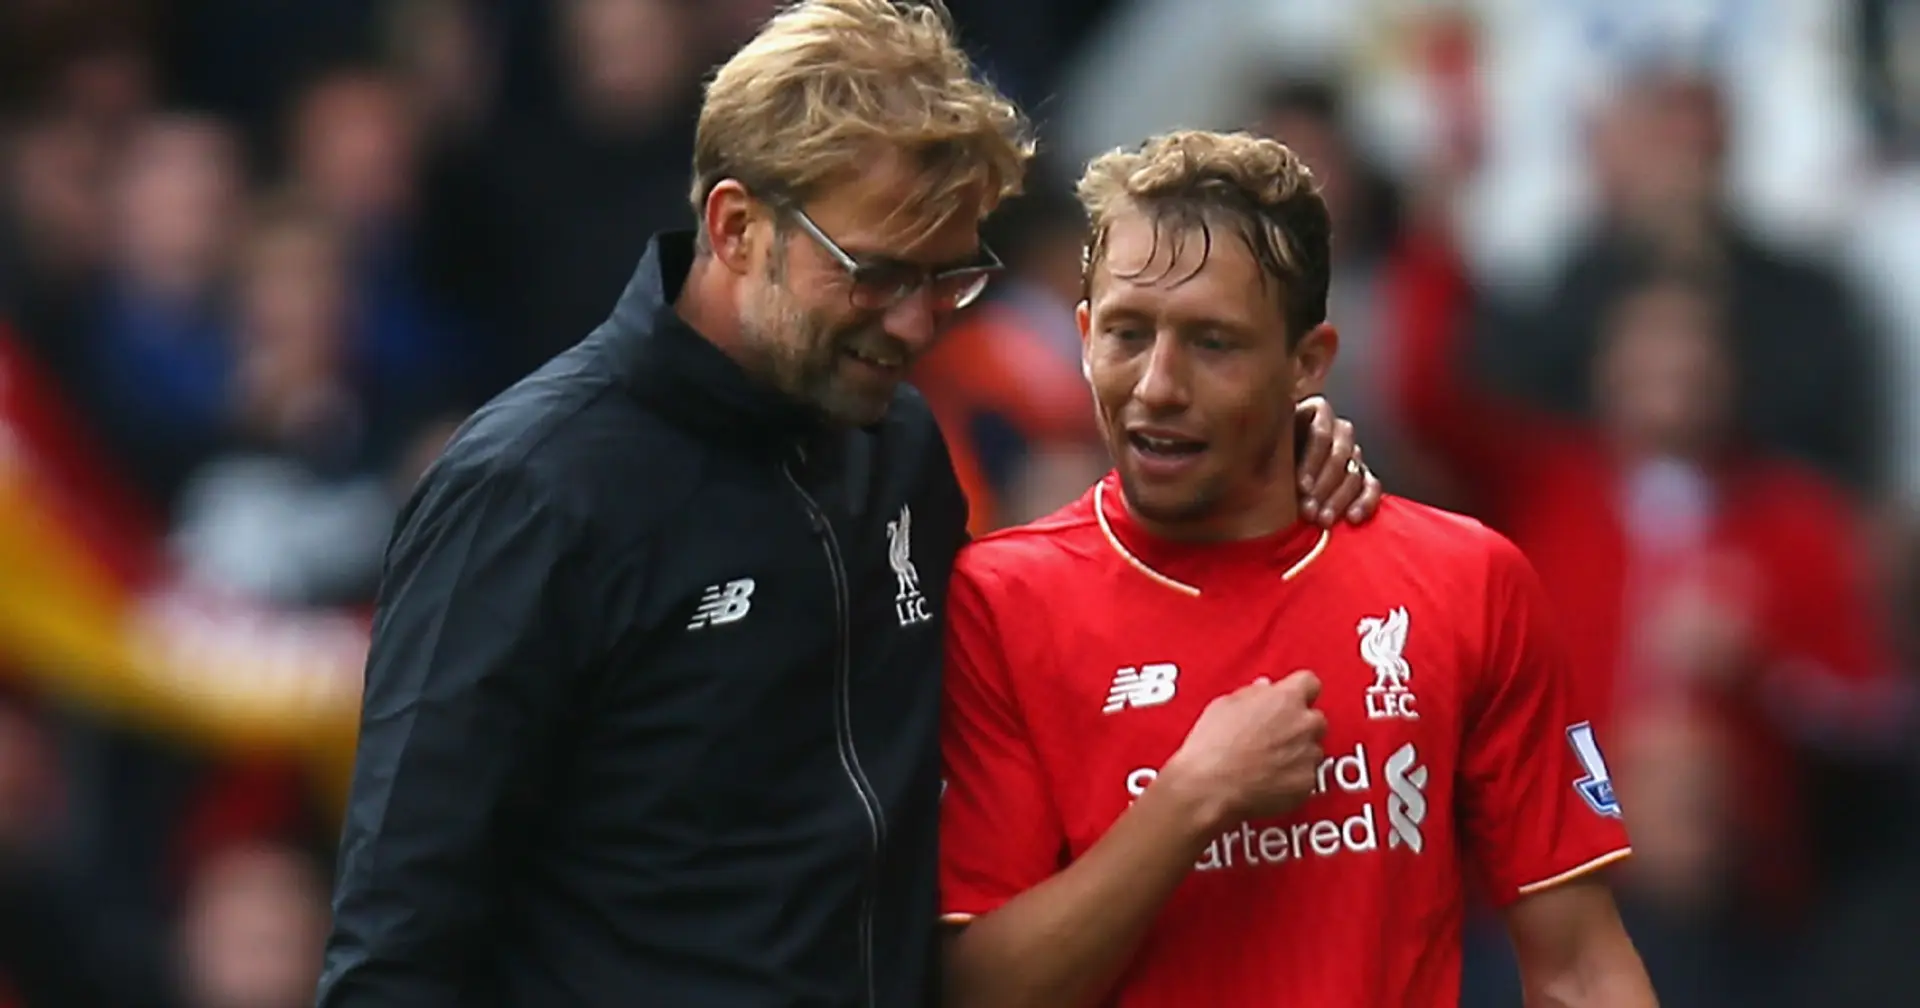 'He was a great manager for me': Lucas Leiva explains his admiration for Jurgen Klopp